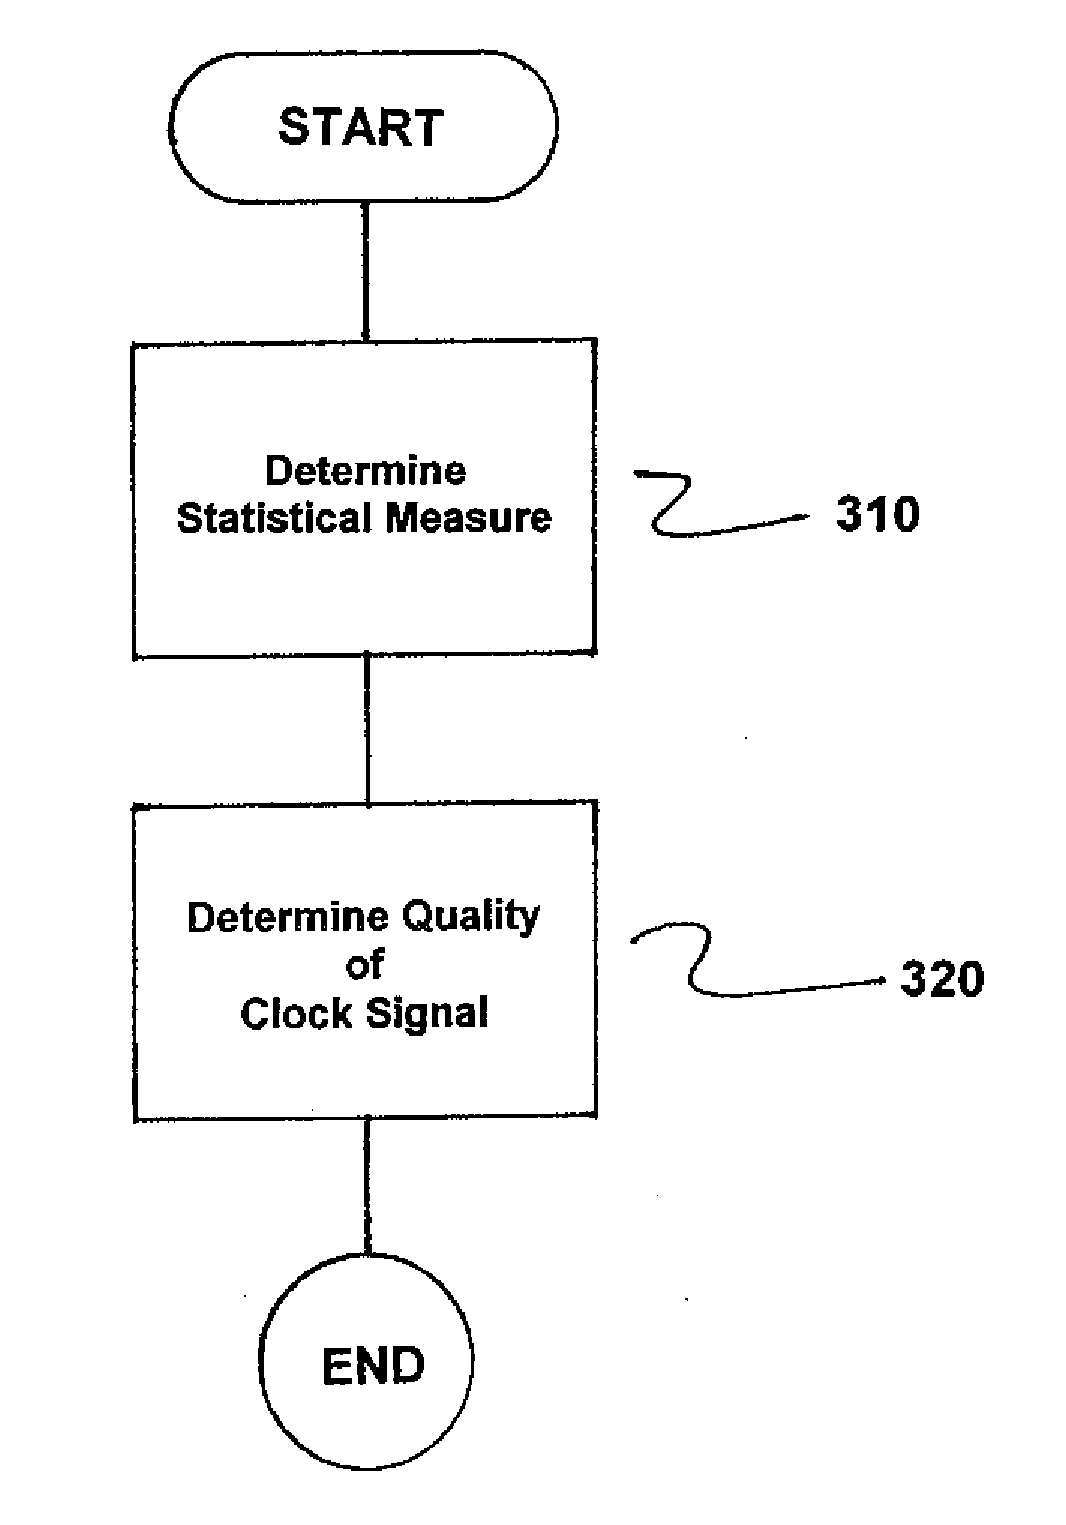 Method and Device for Determining a Quality of a Clock Signal